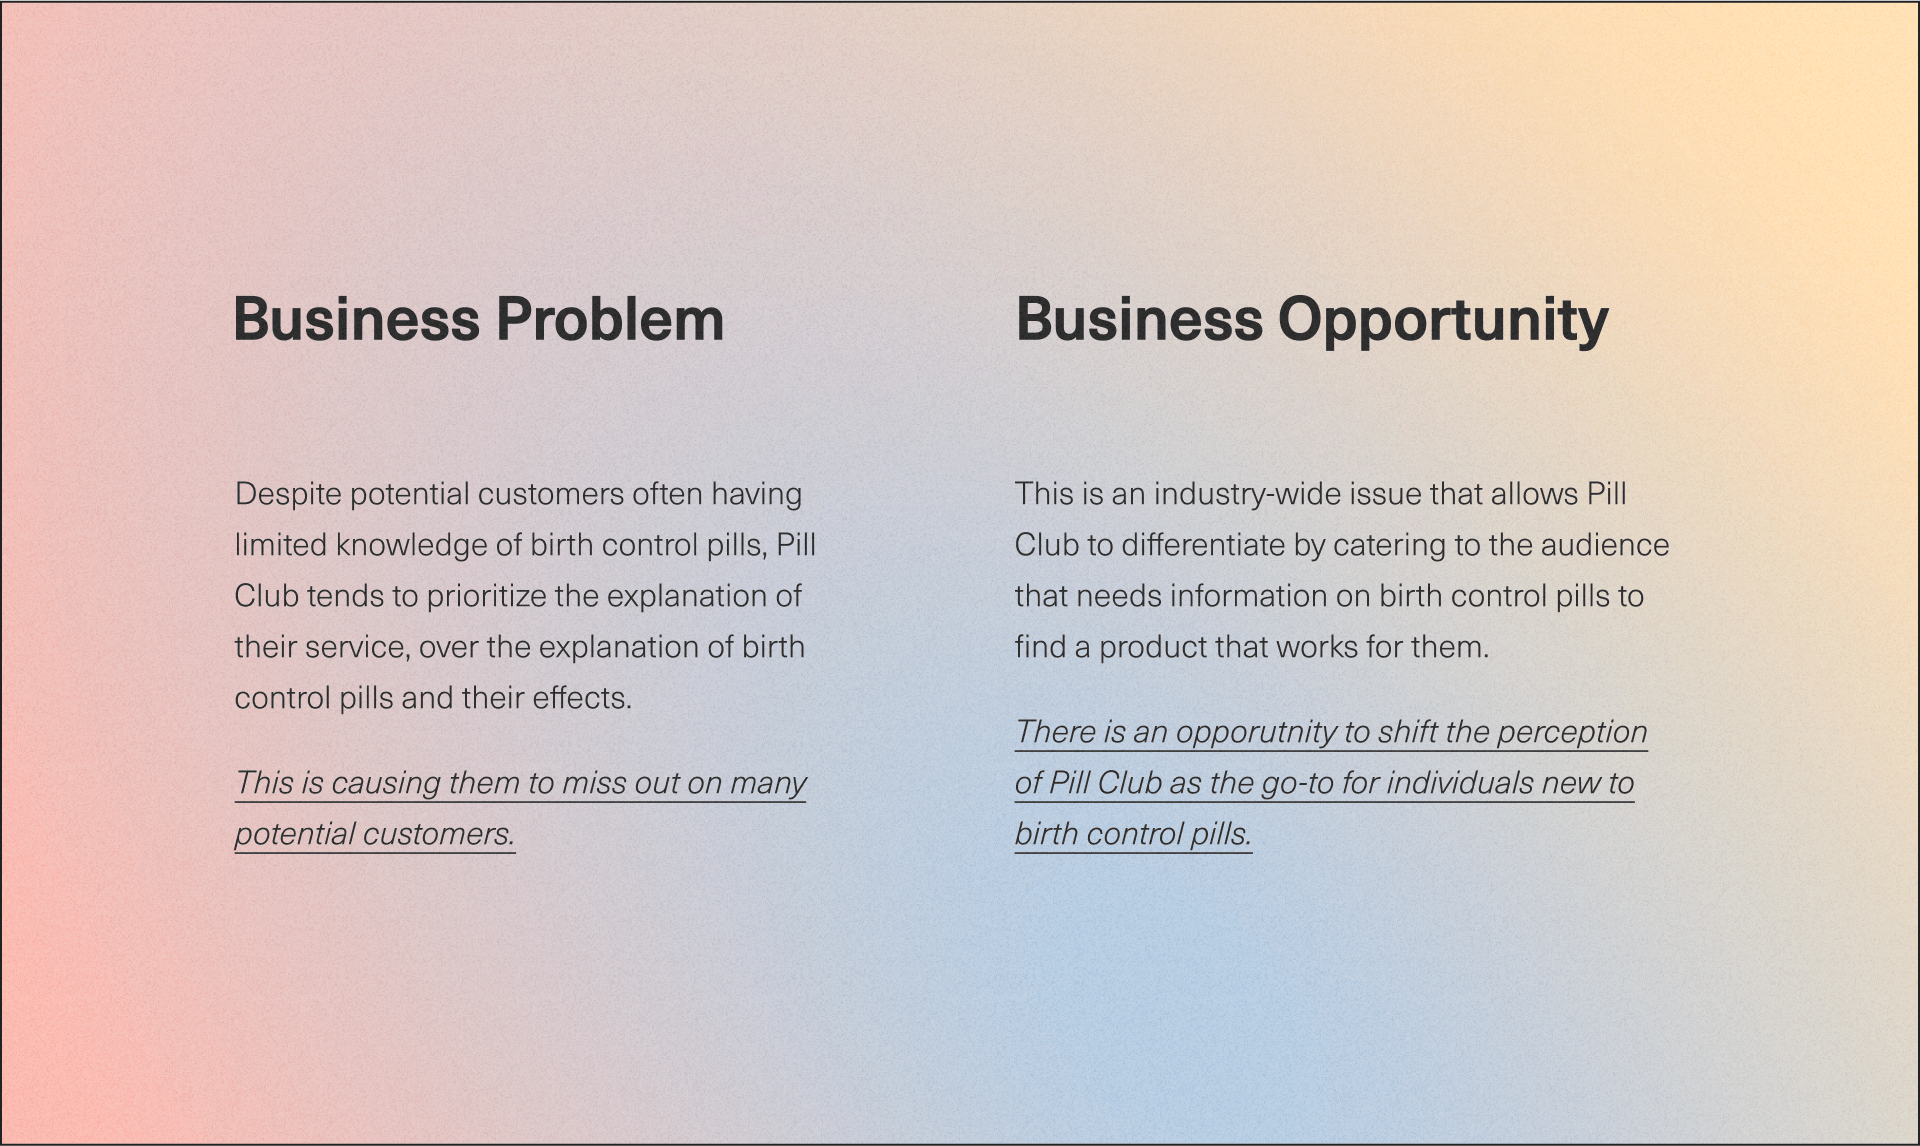 Identified business problem and opportunity